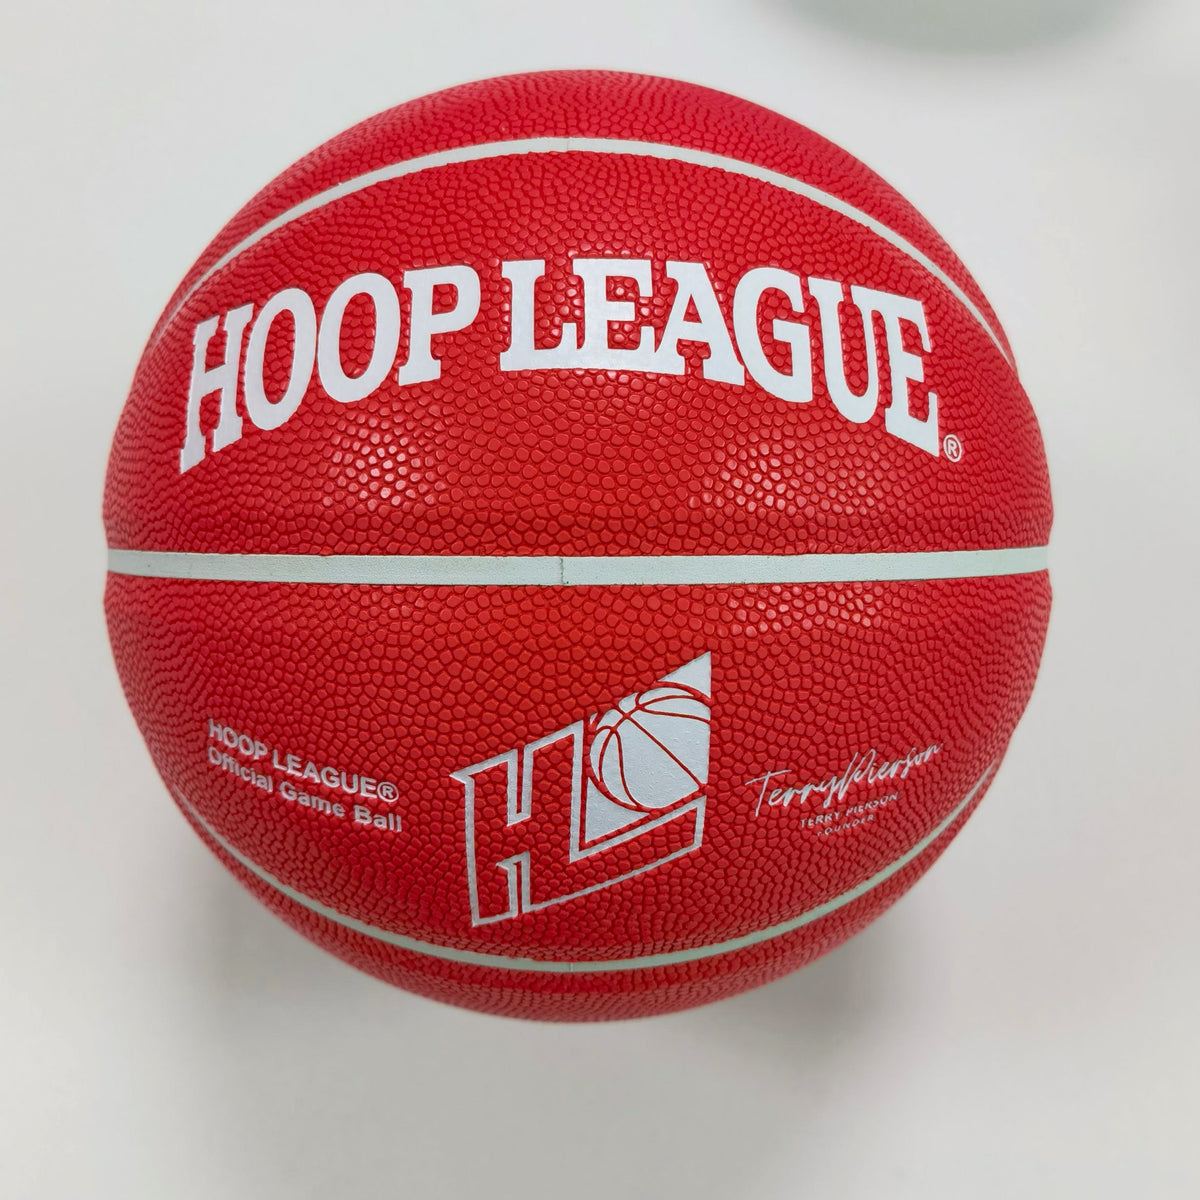  Microfiber Leather Indoor Game Basketball